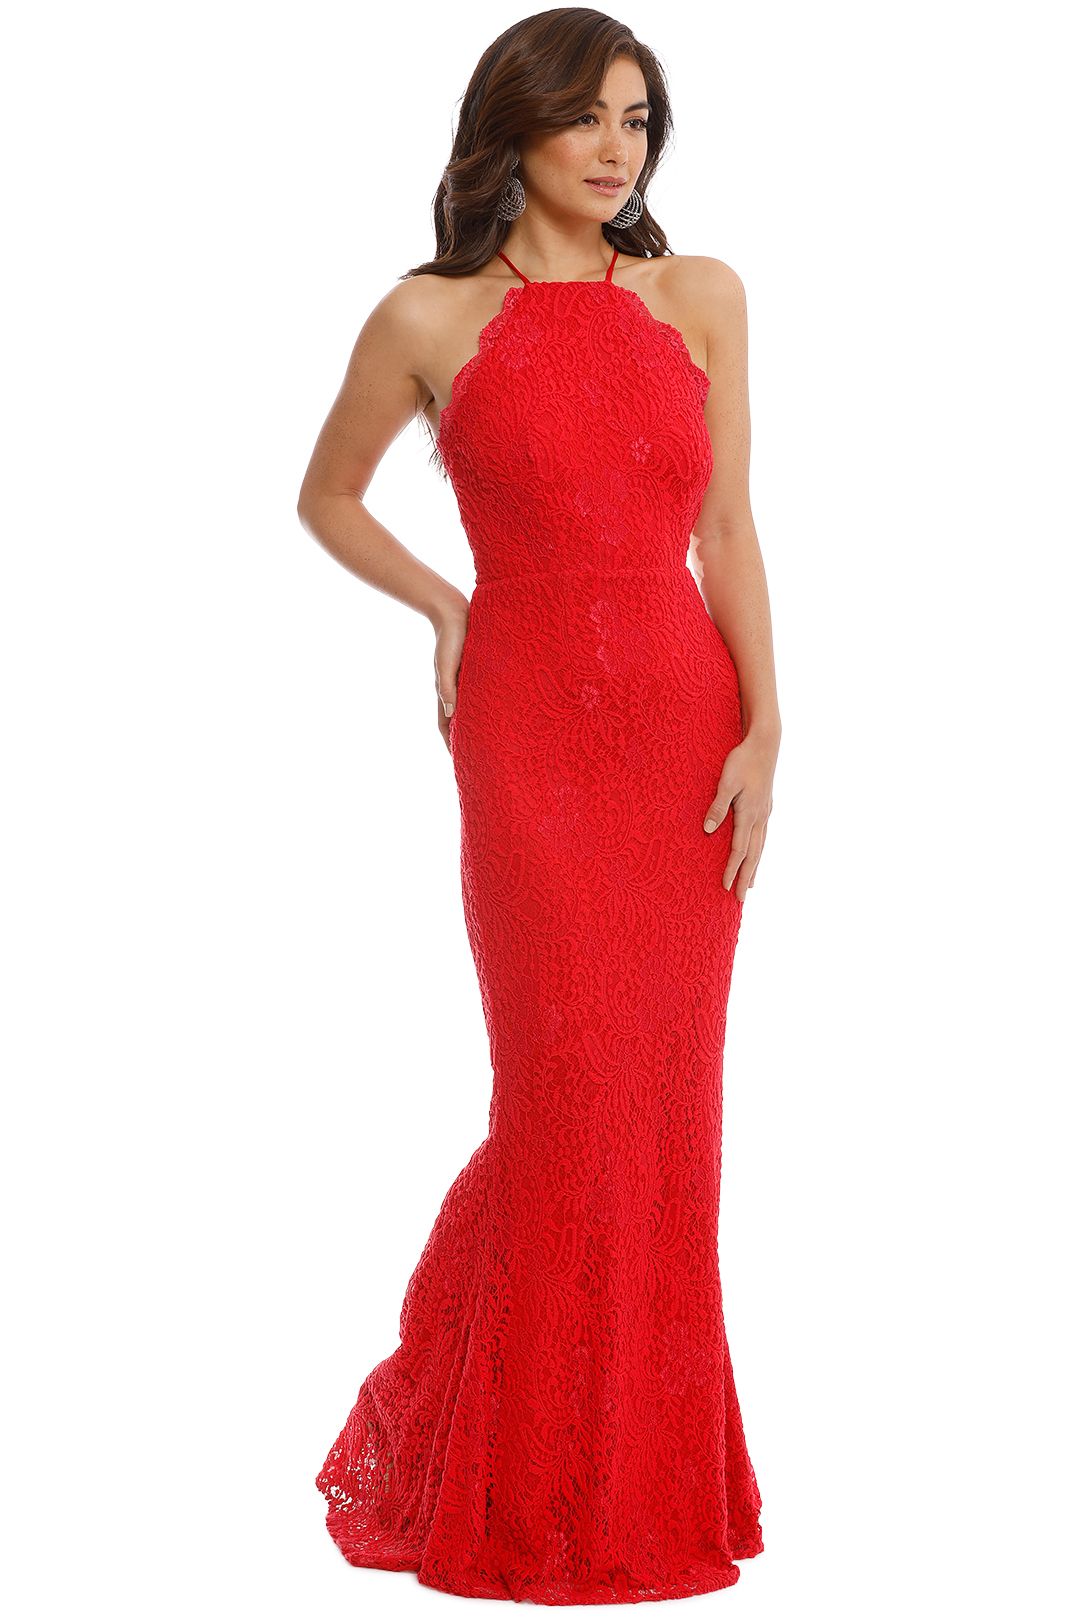 Elle Zeitoune - Lori Red Gown - Red - Side